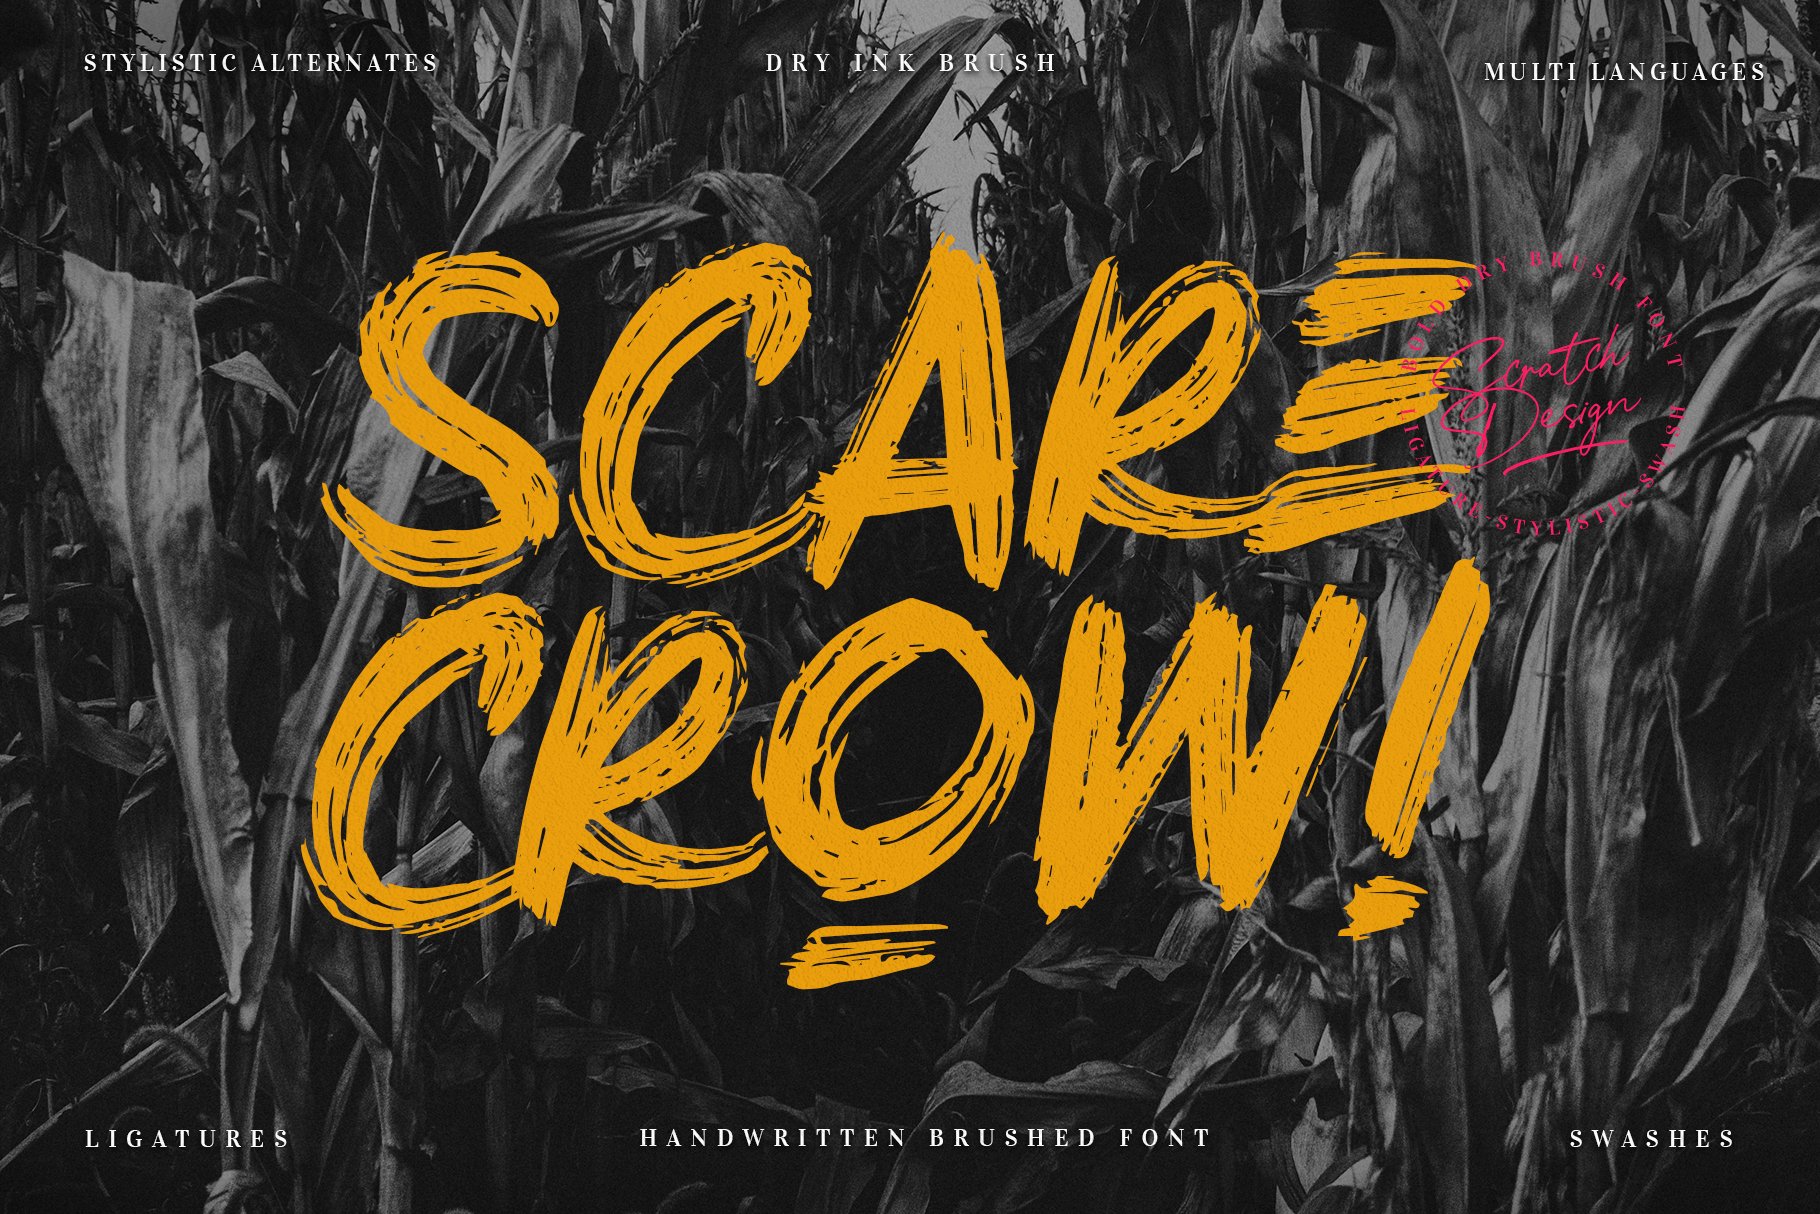 Scarecrow cover image.